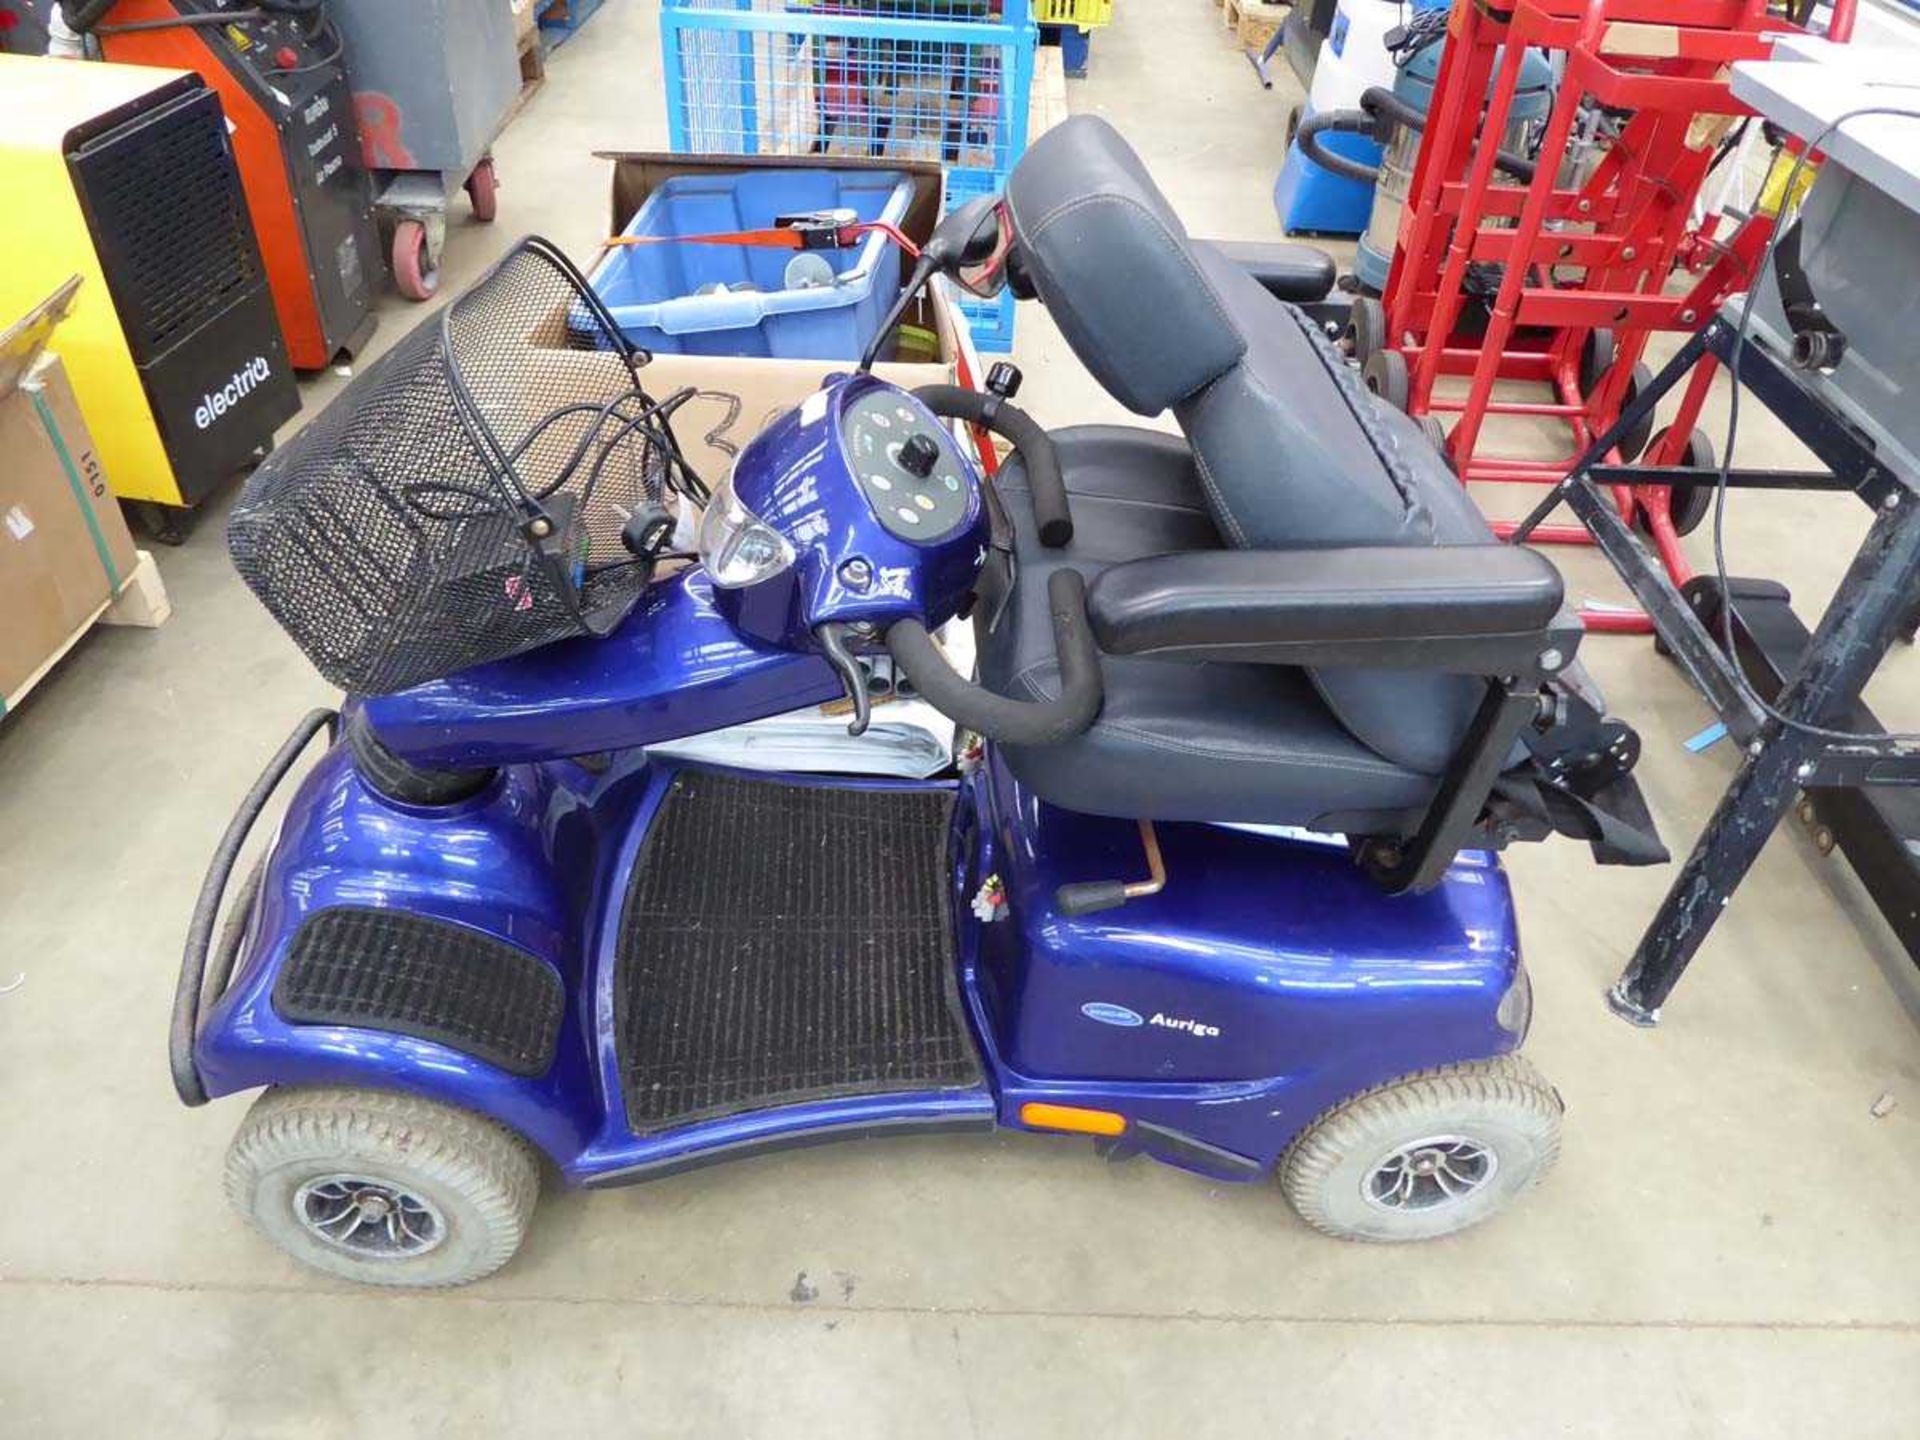 Invacare disability scooter in blue with charger - Image 2 of 3